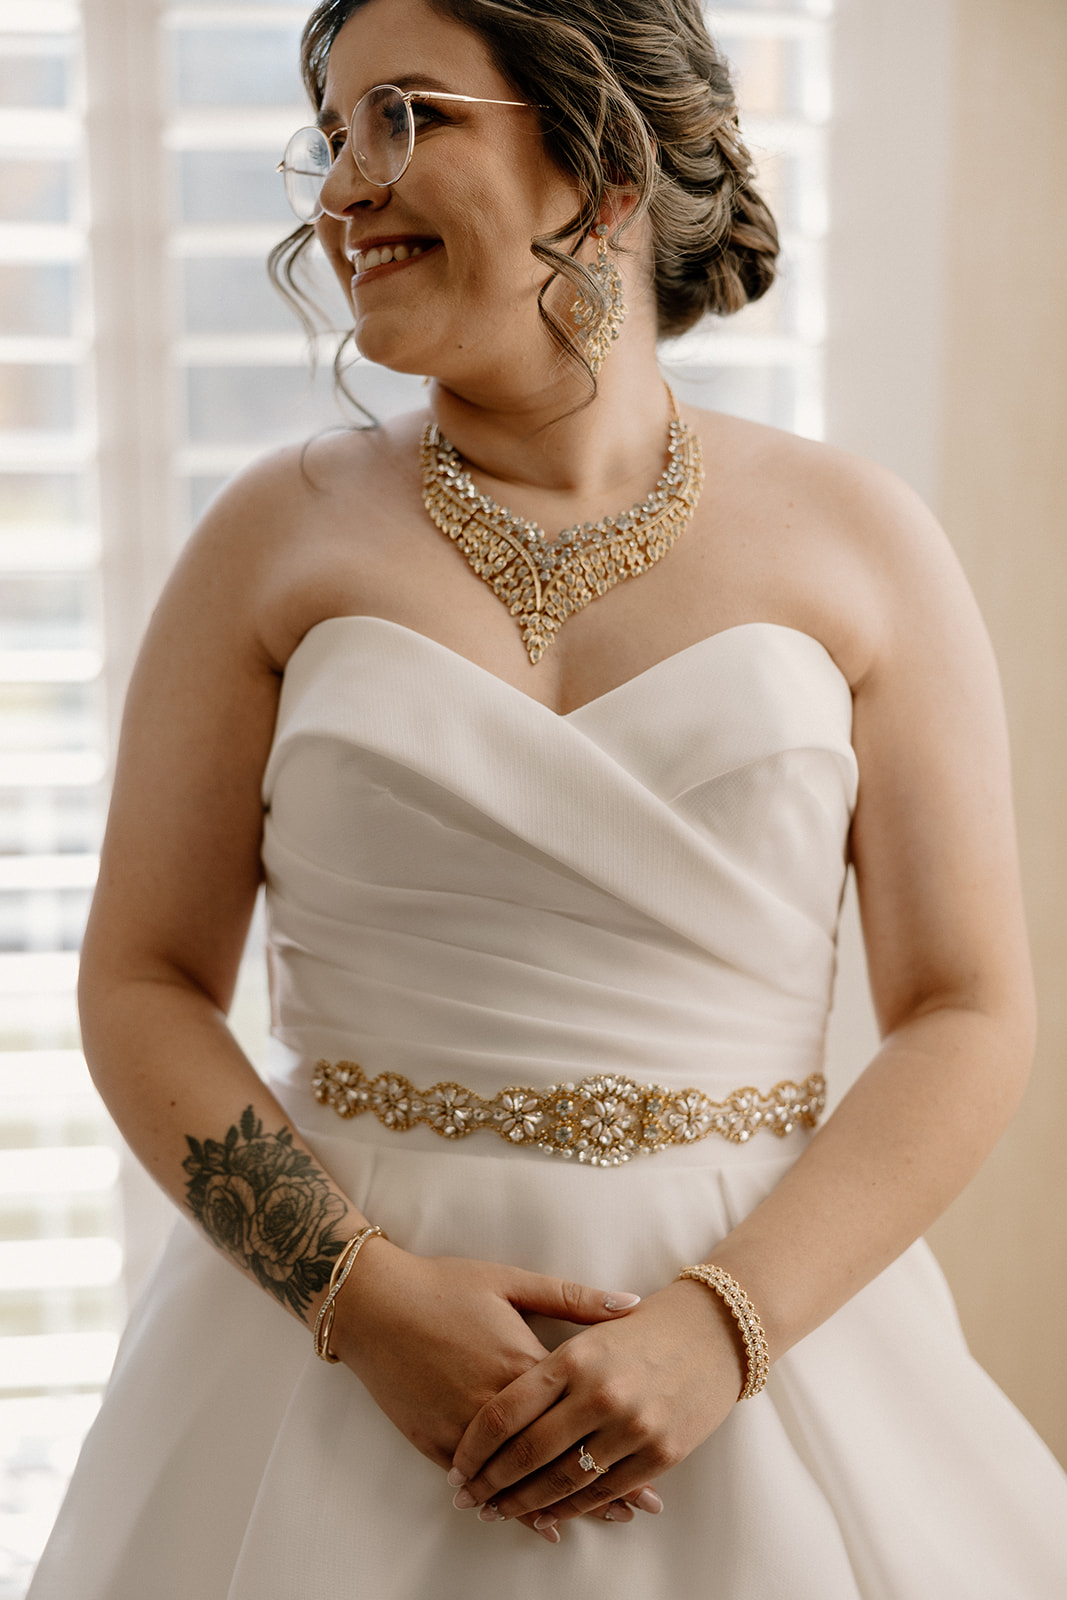 Stunning bride poses as she finalizes her prep 